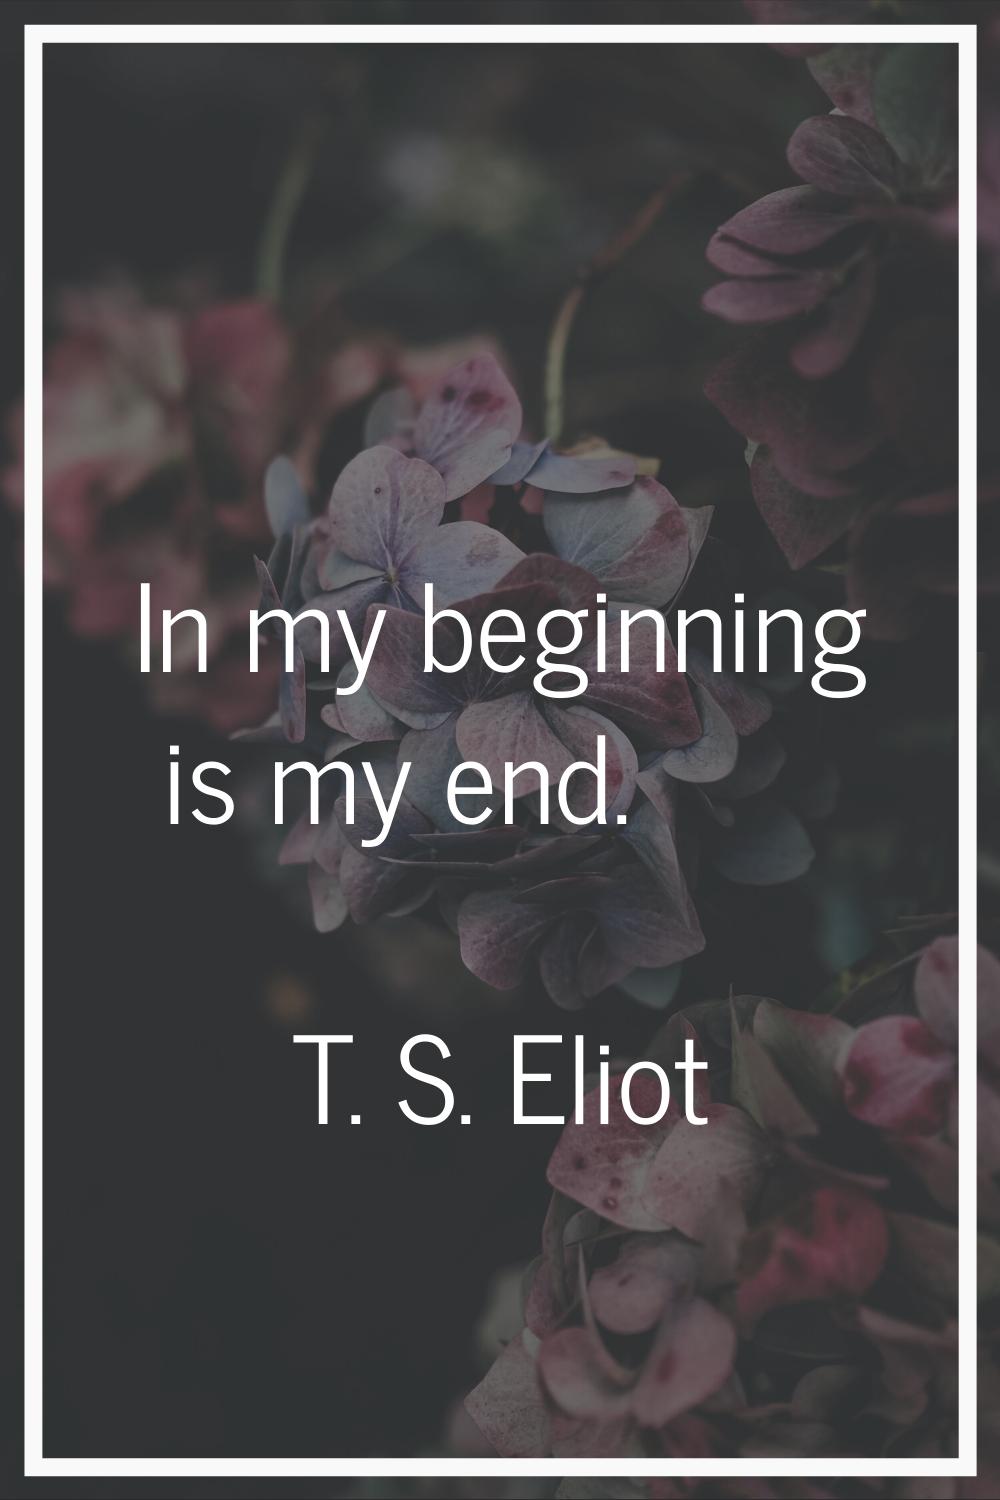 In my beginning is my end.